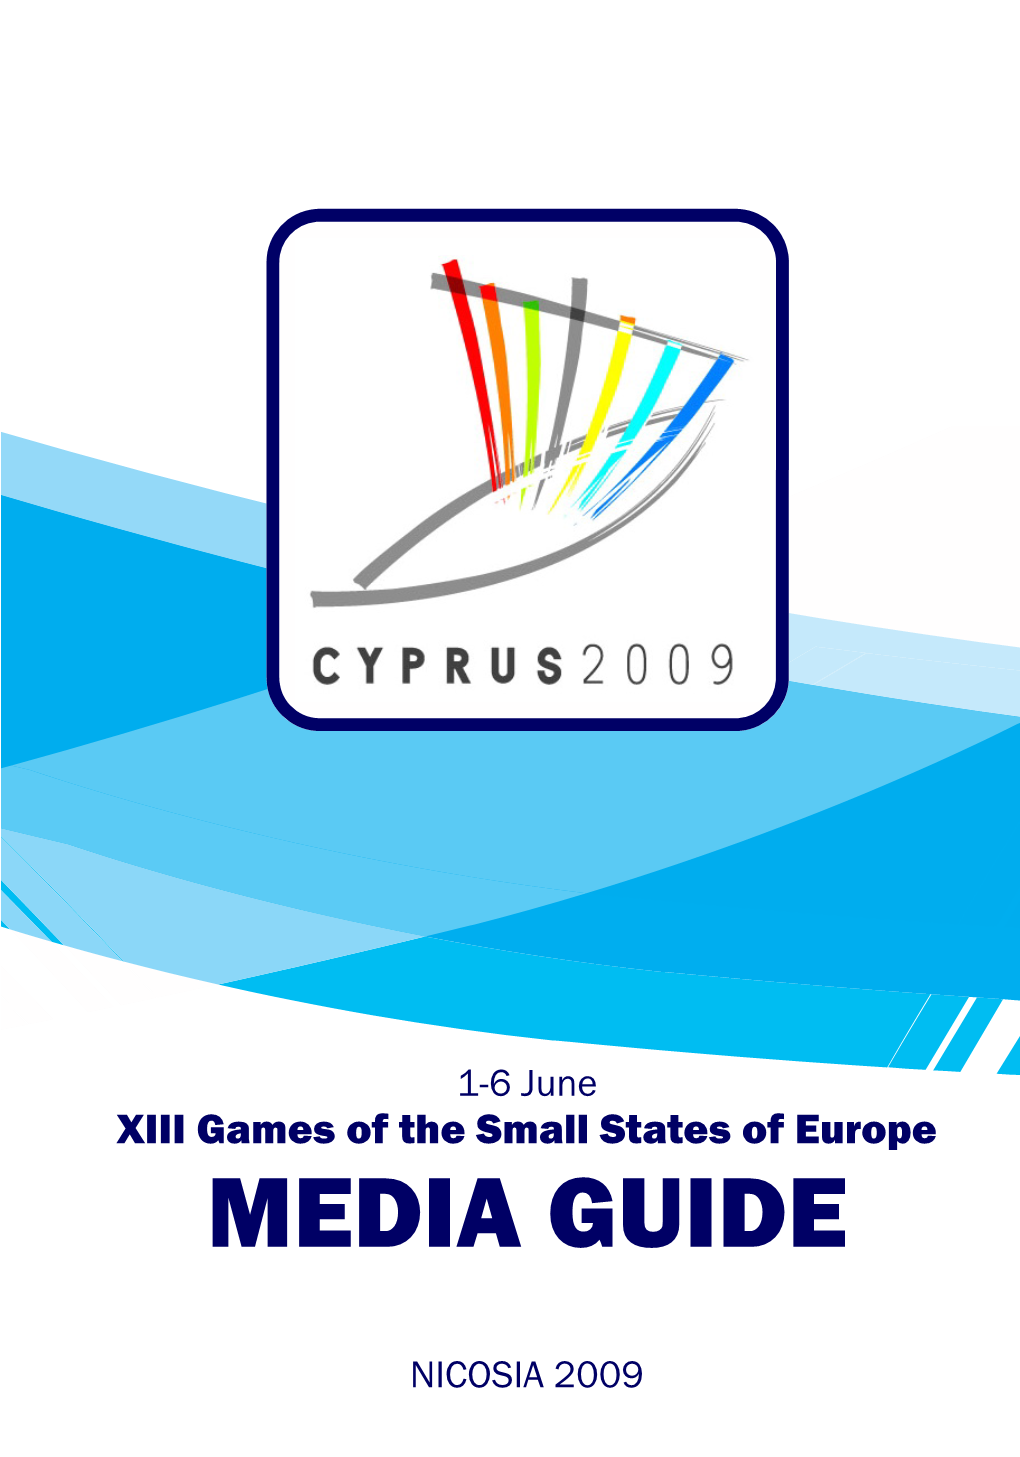 XIII Games of the Small States of Europe MEDIA GUIDE